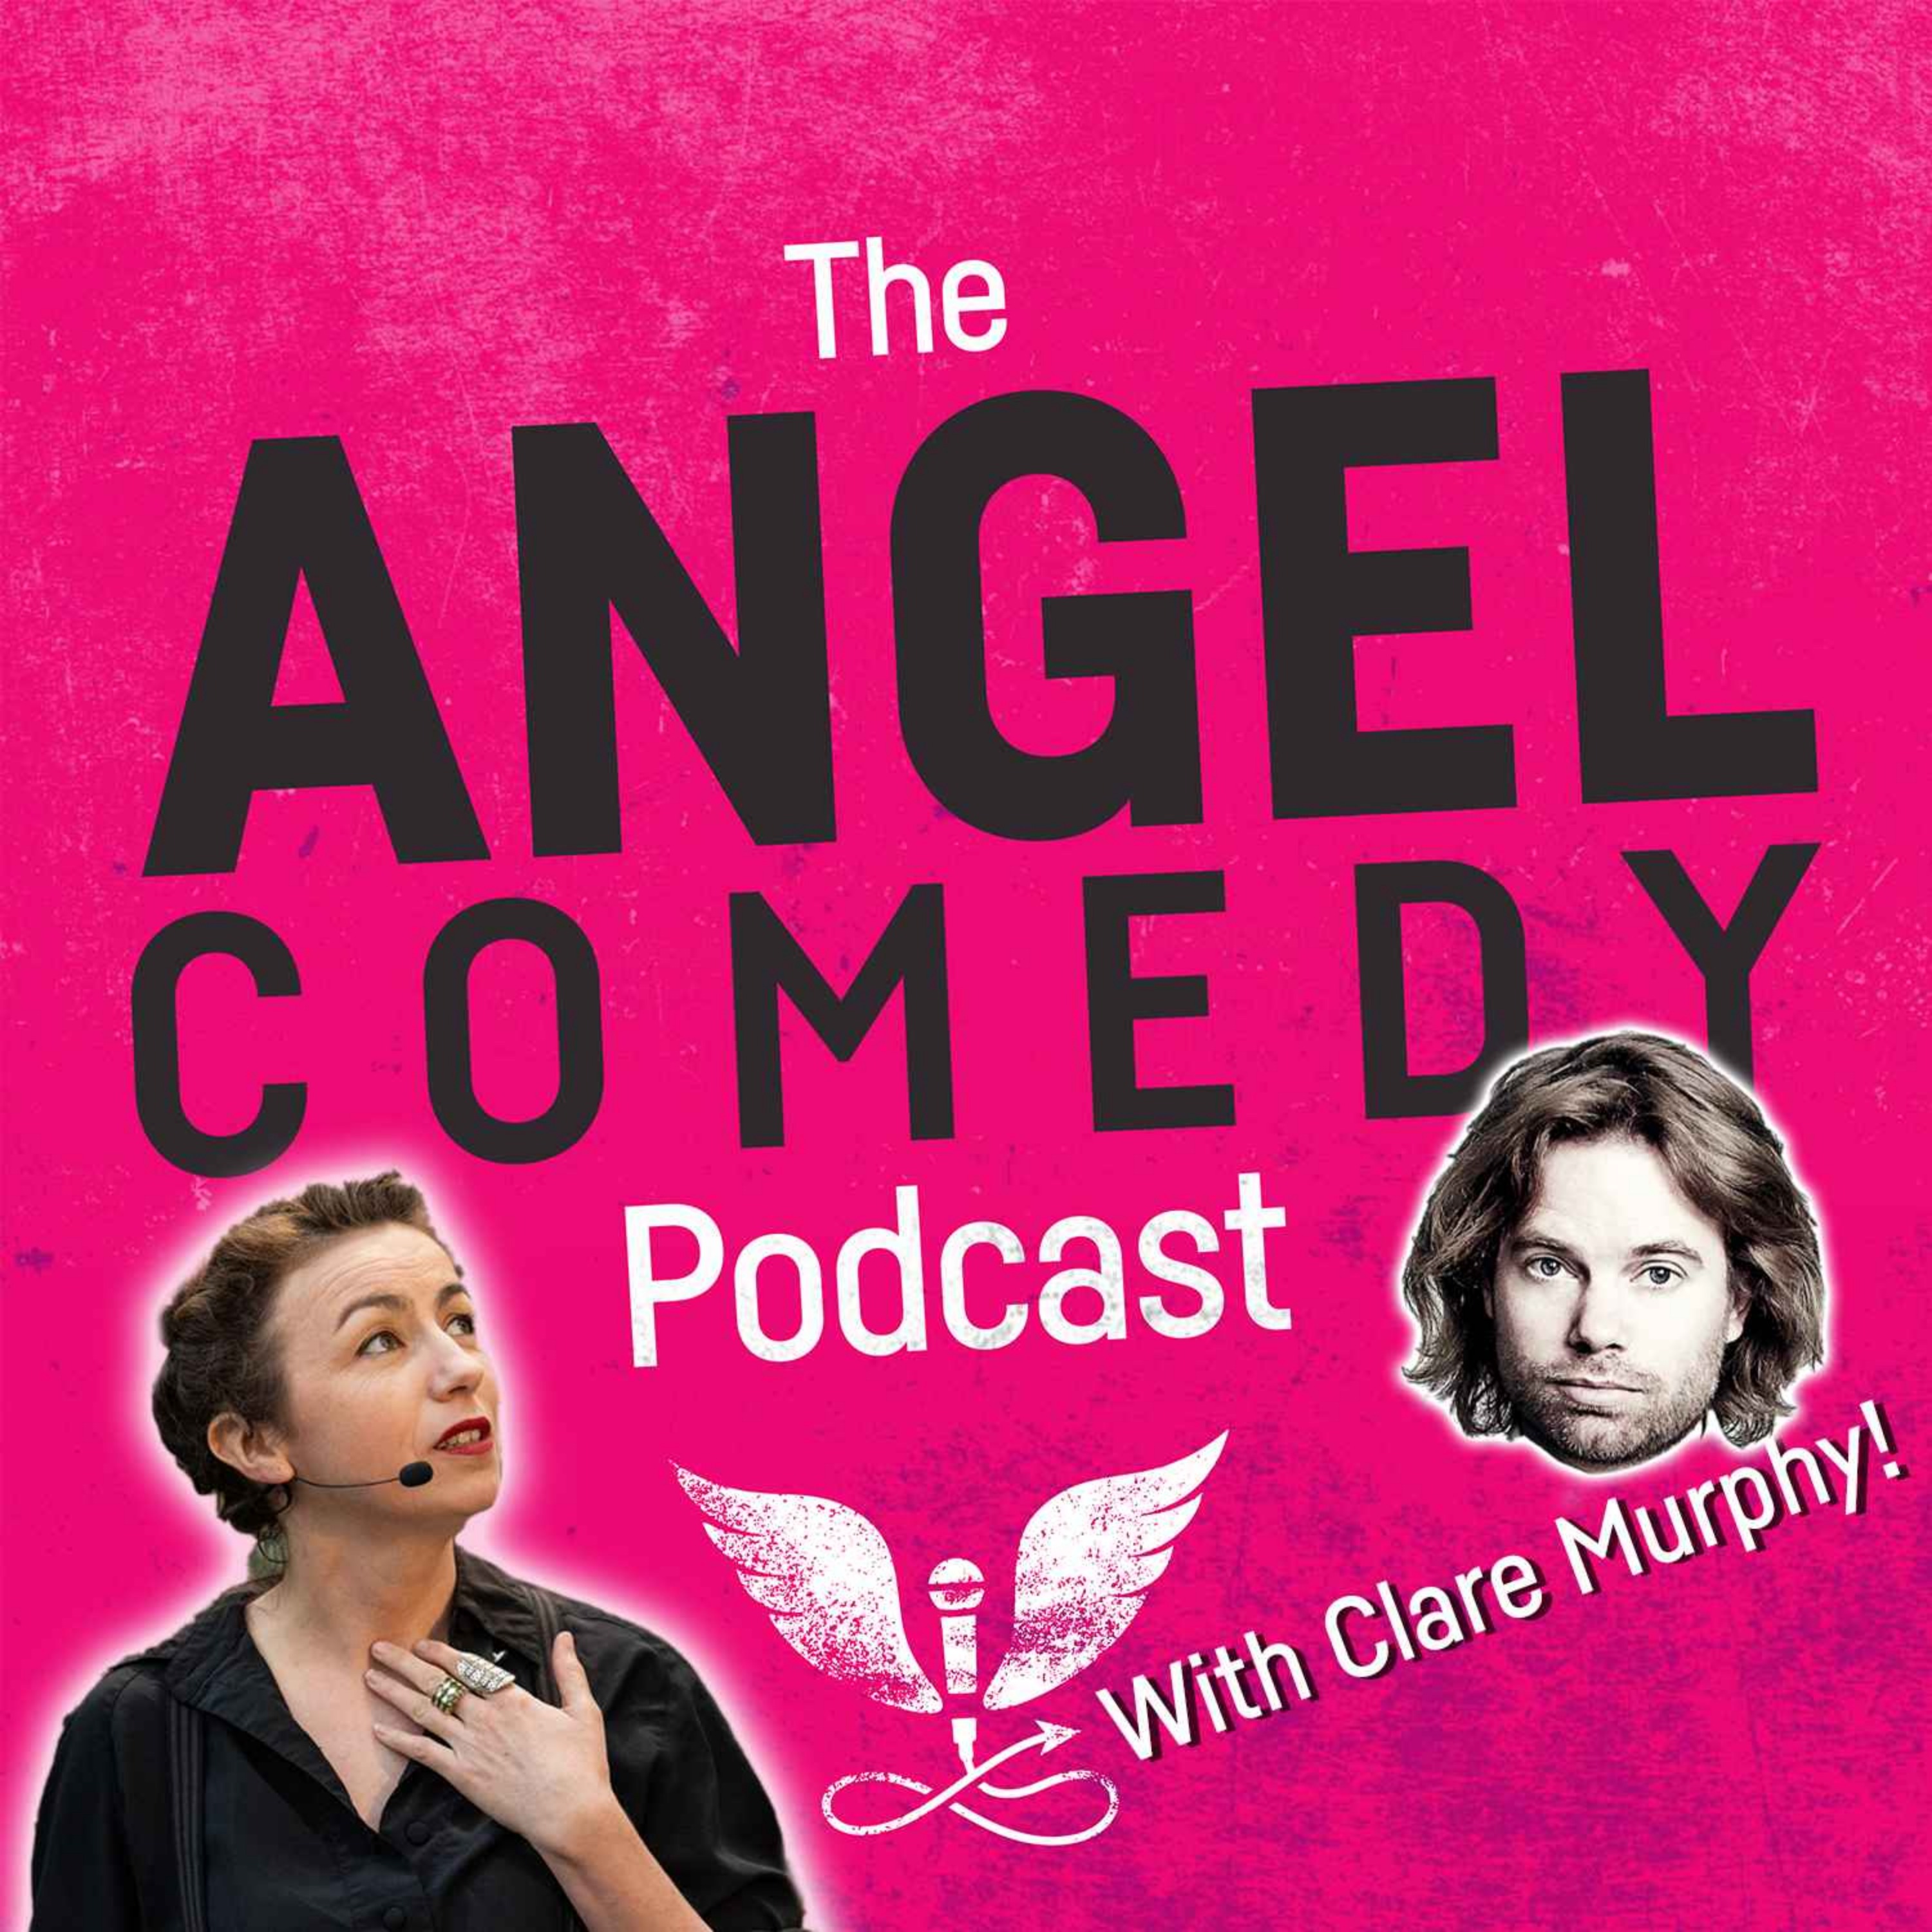 The Angel Comedy Podcast with Clare Murphy!